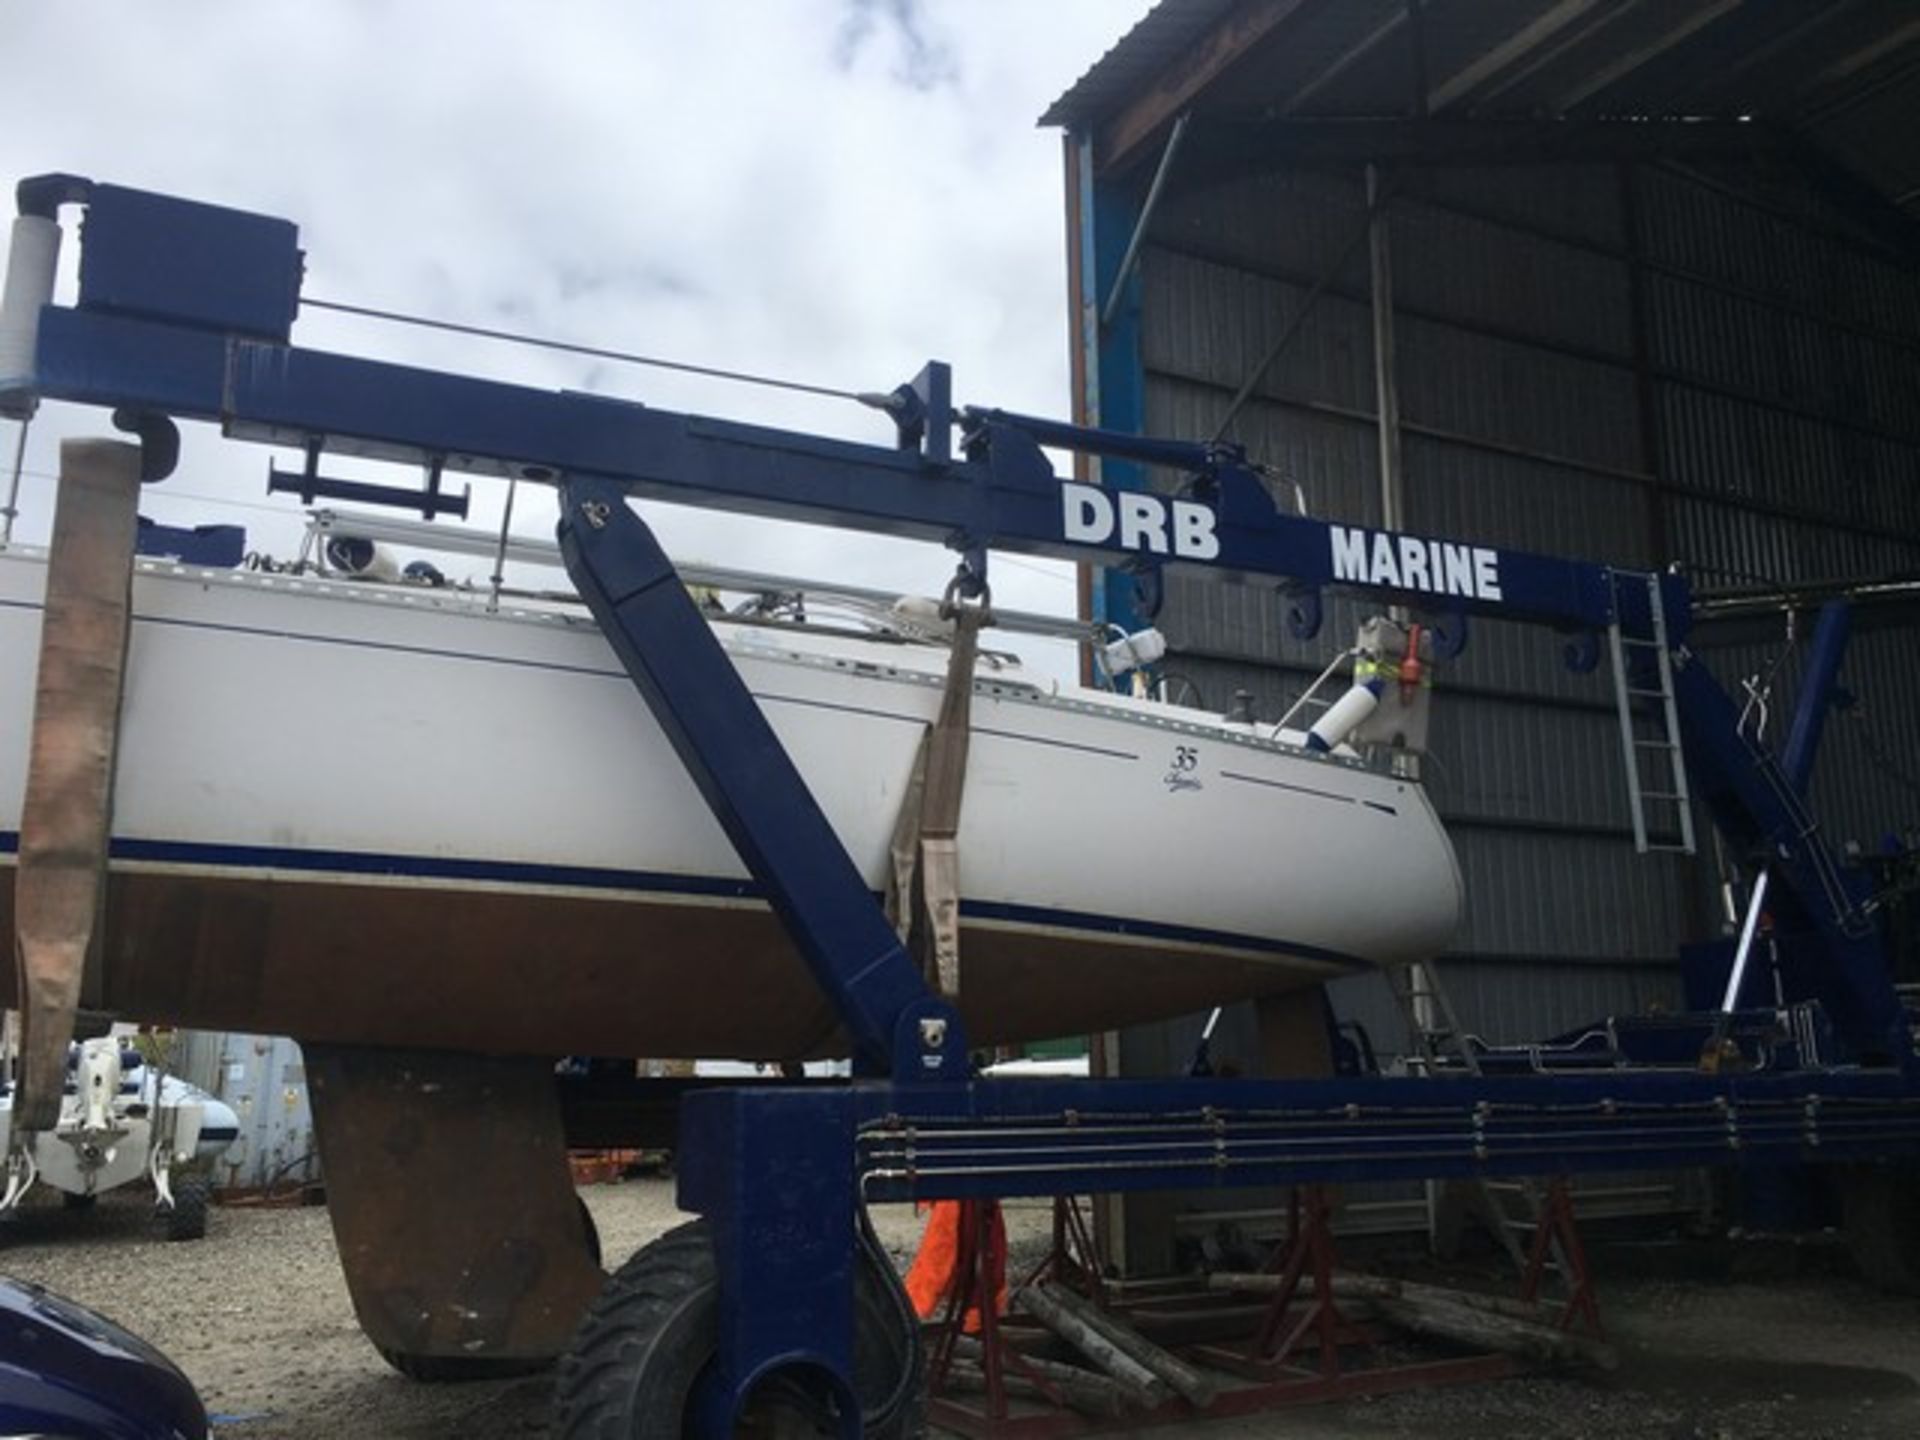 18T SELF PROPELLED WISE AMPHIBIOUS MARINE HOIST C/W VARIABLE WIDTH FRAME **RECENTLY REFURBED - NEW P